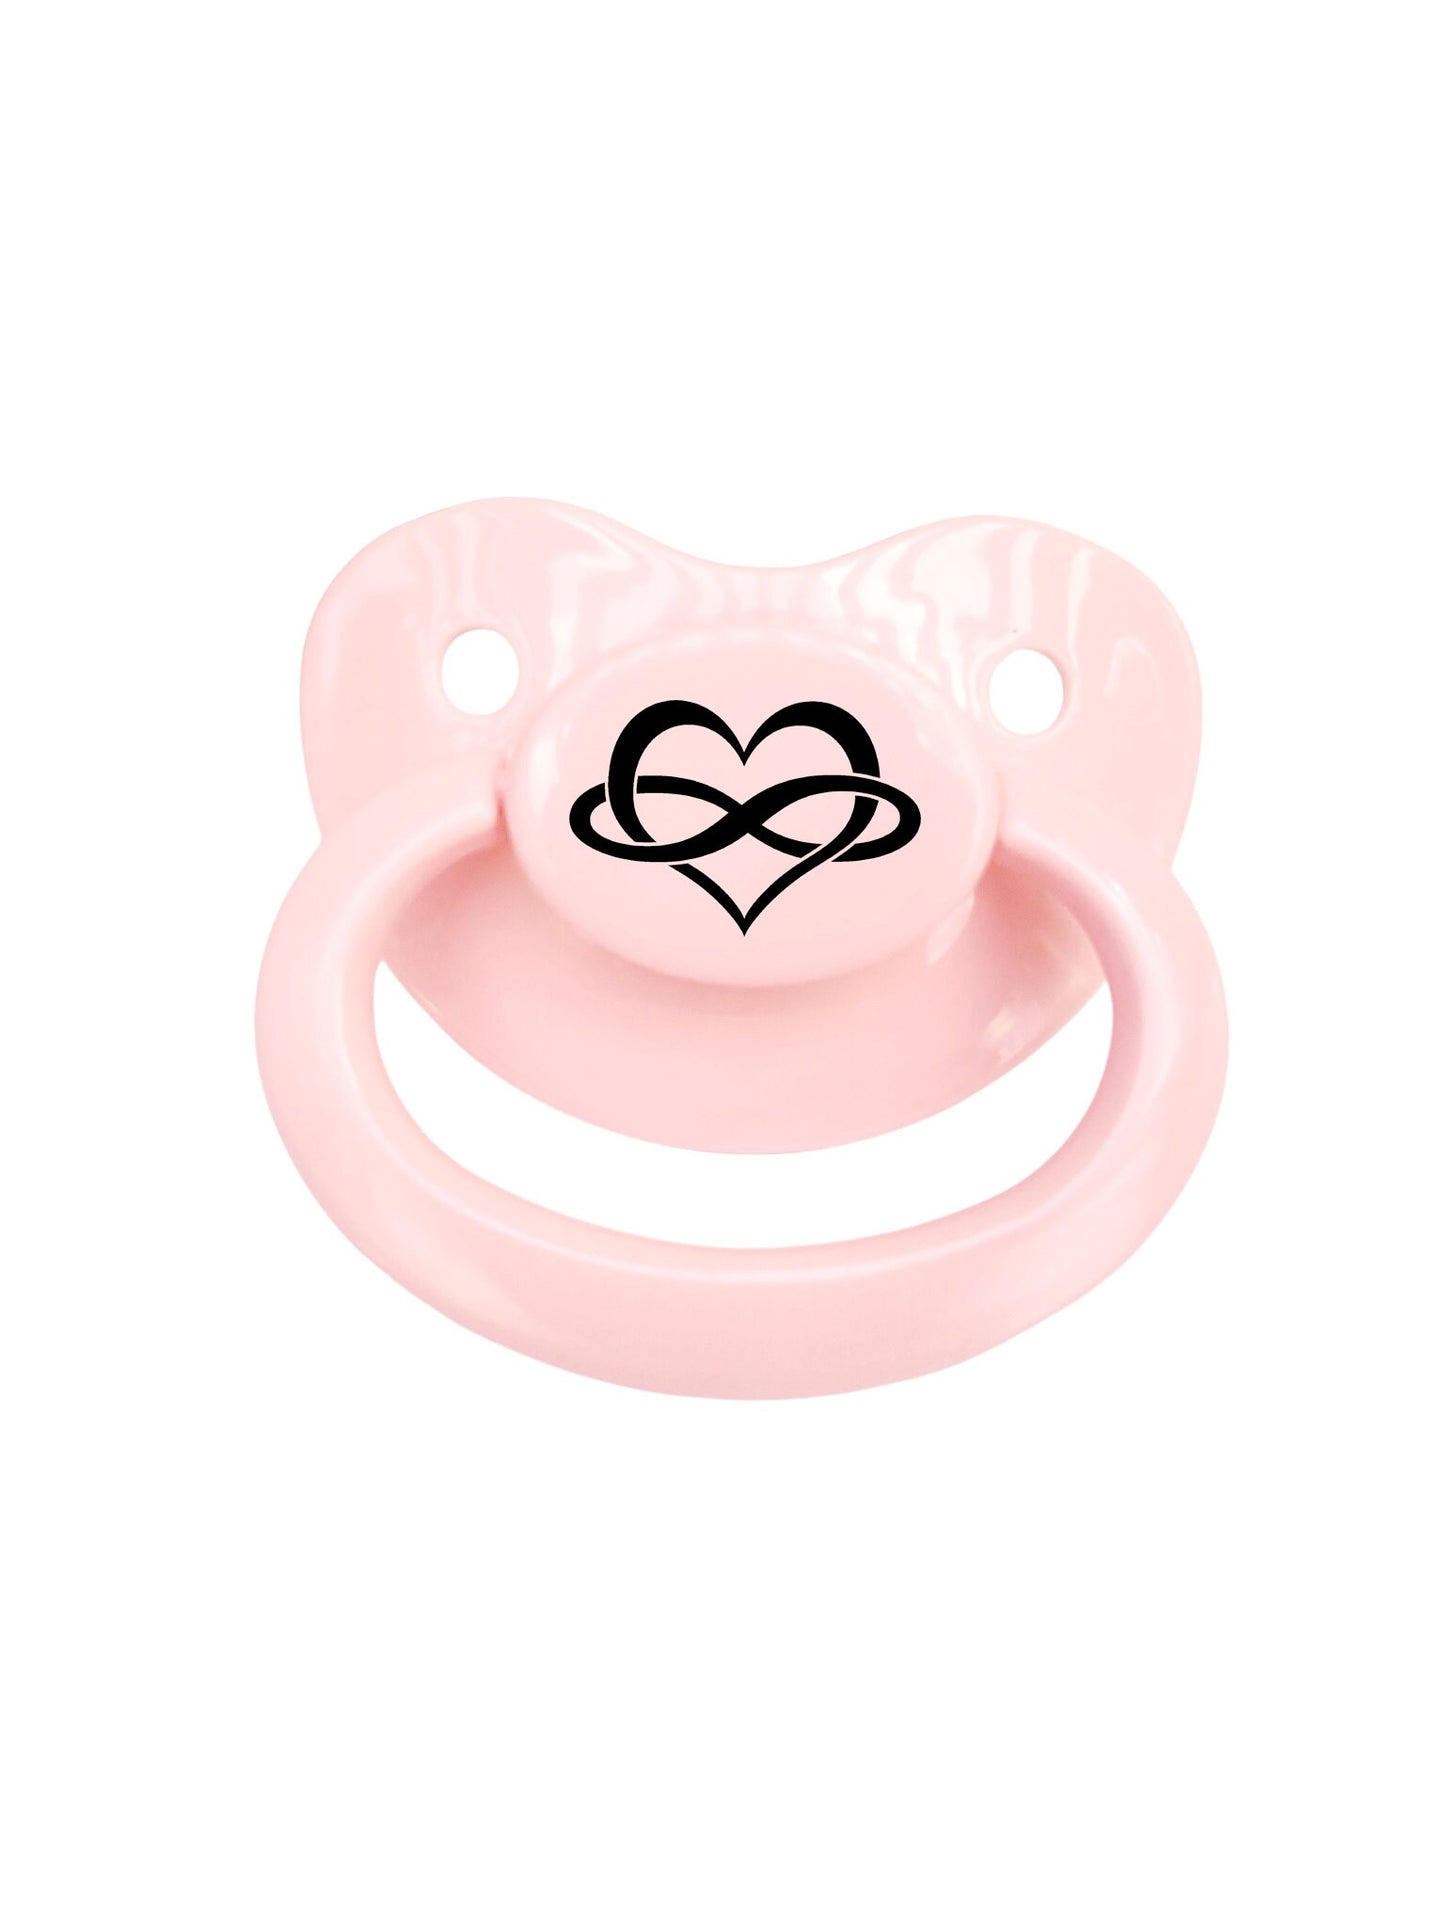 Polyamorous Adult Pacifier